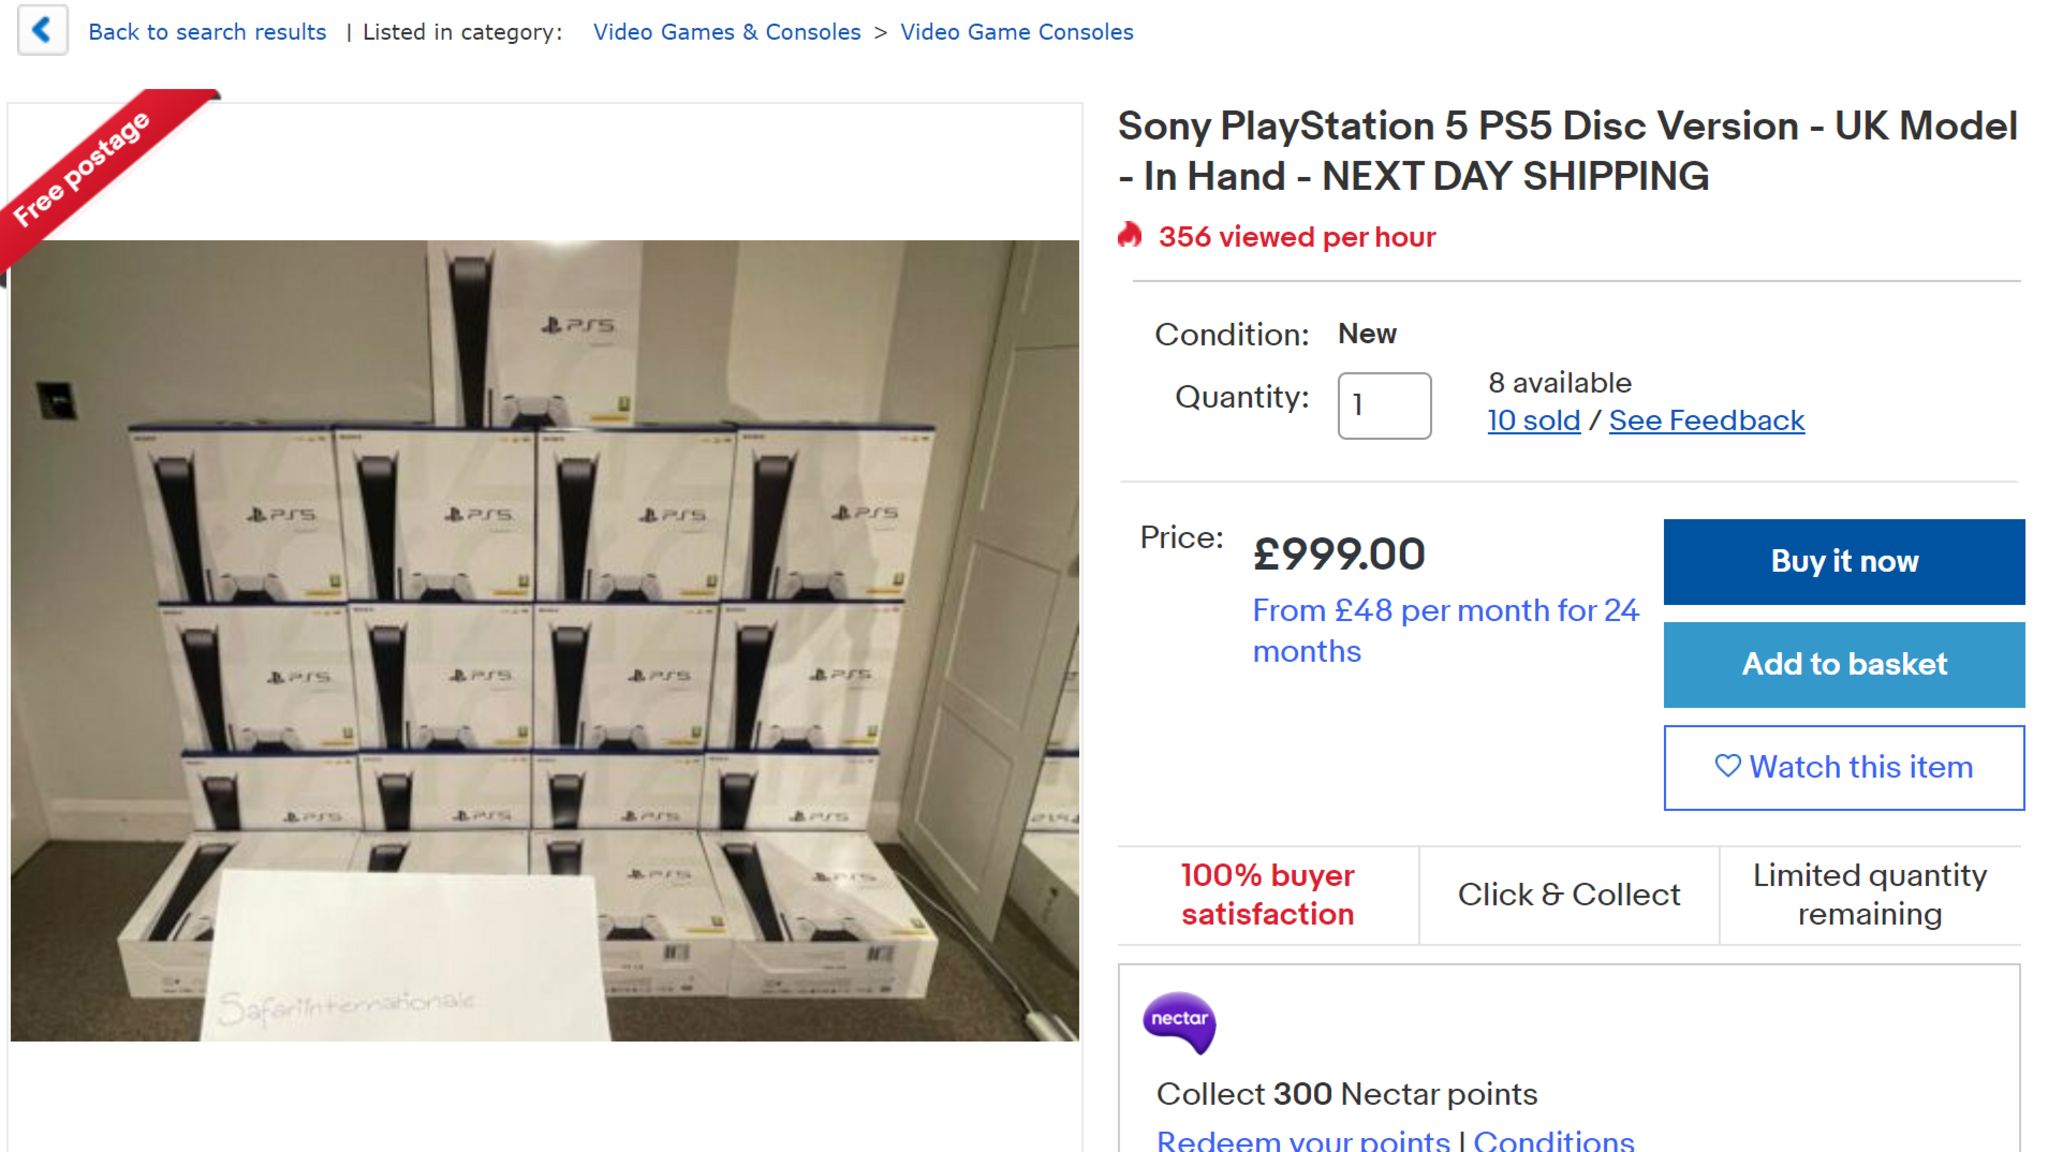 A screenshot shows a stack of PlayStation 5s in the living room, each for sale at £999